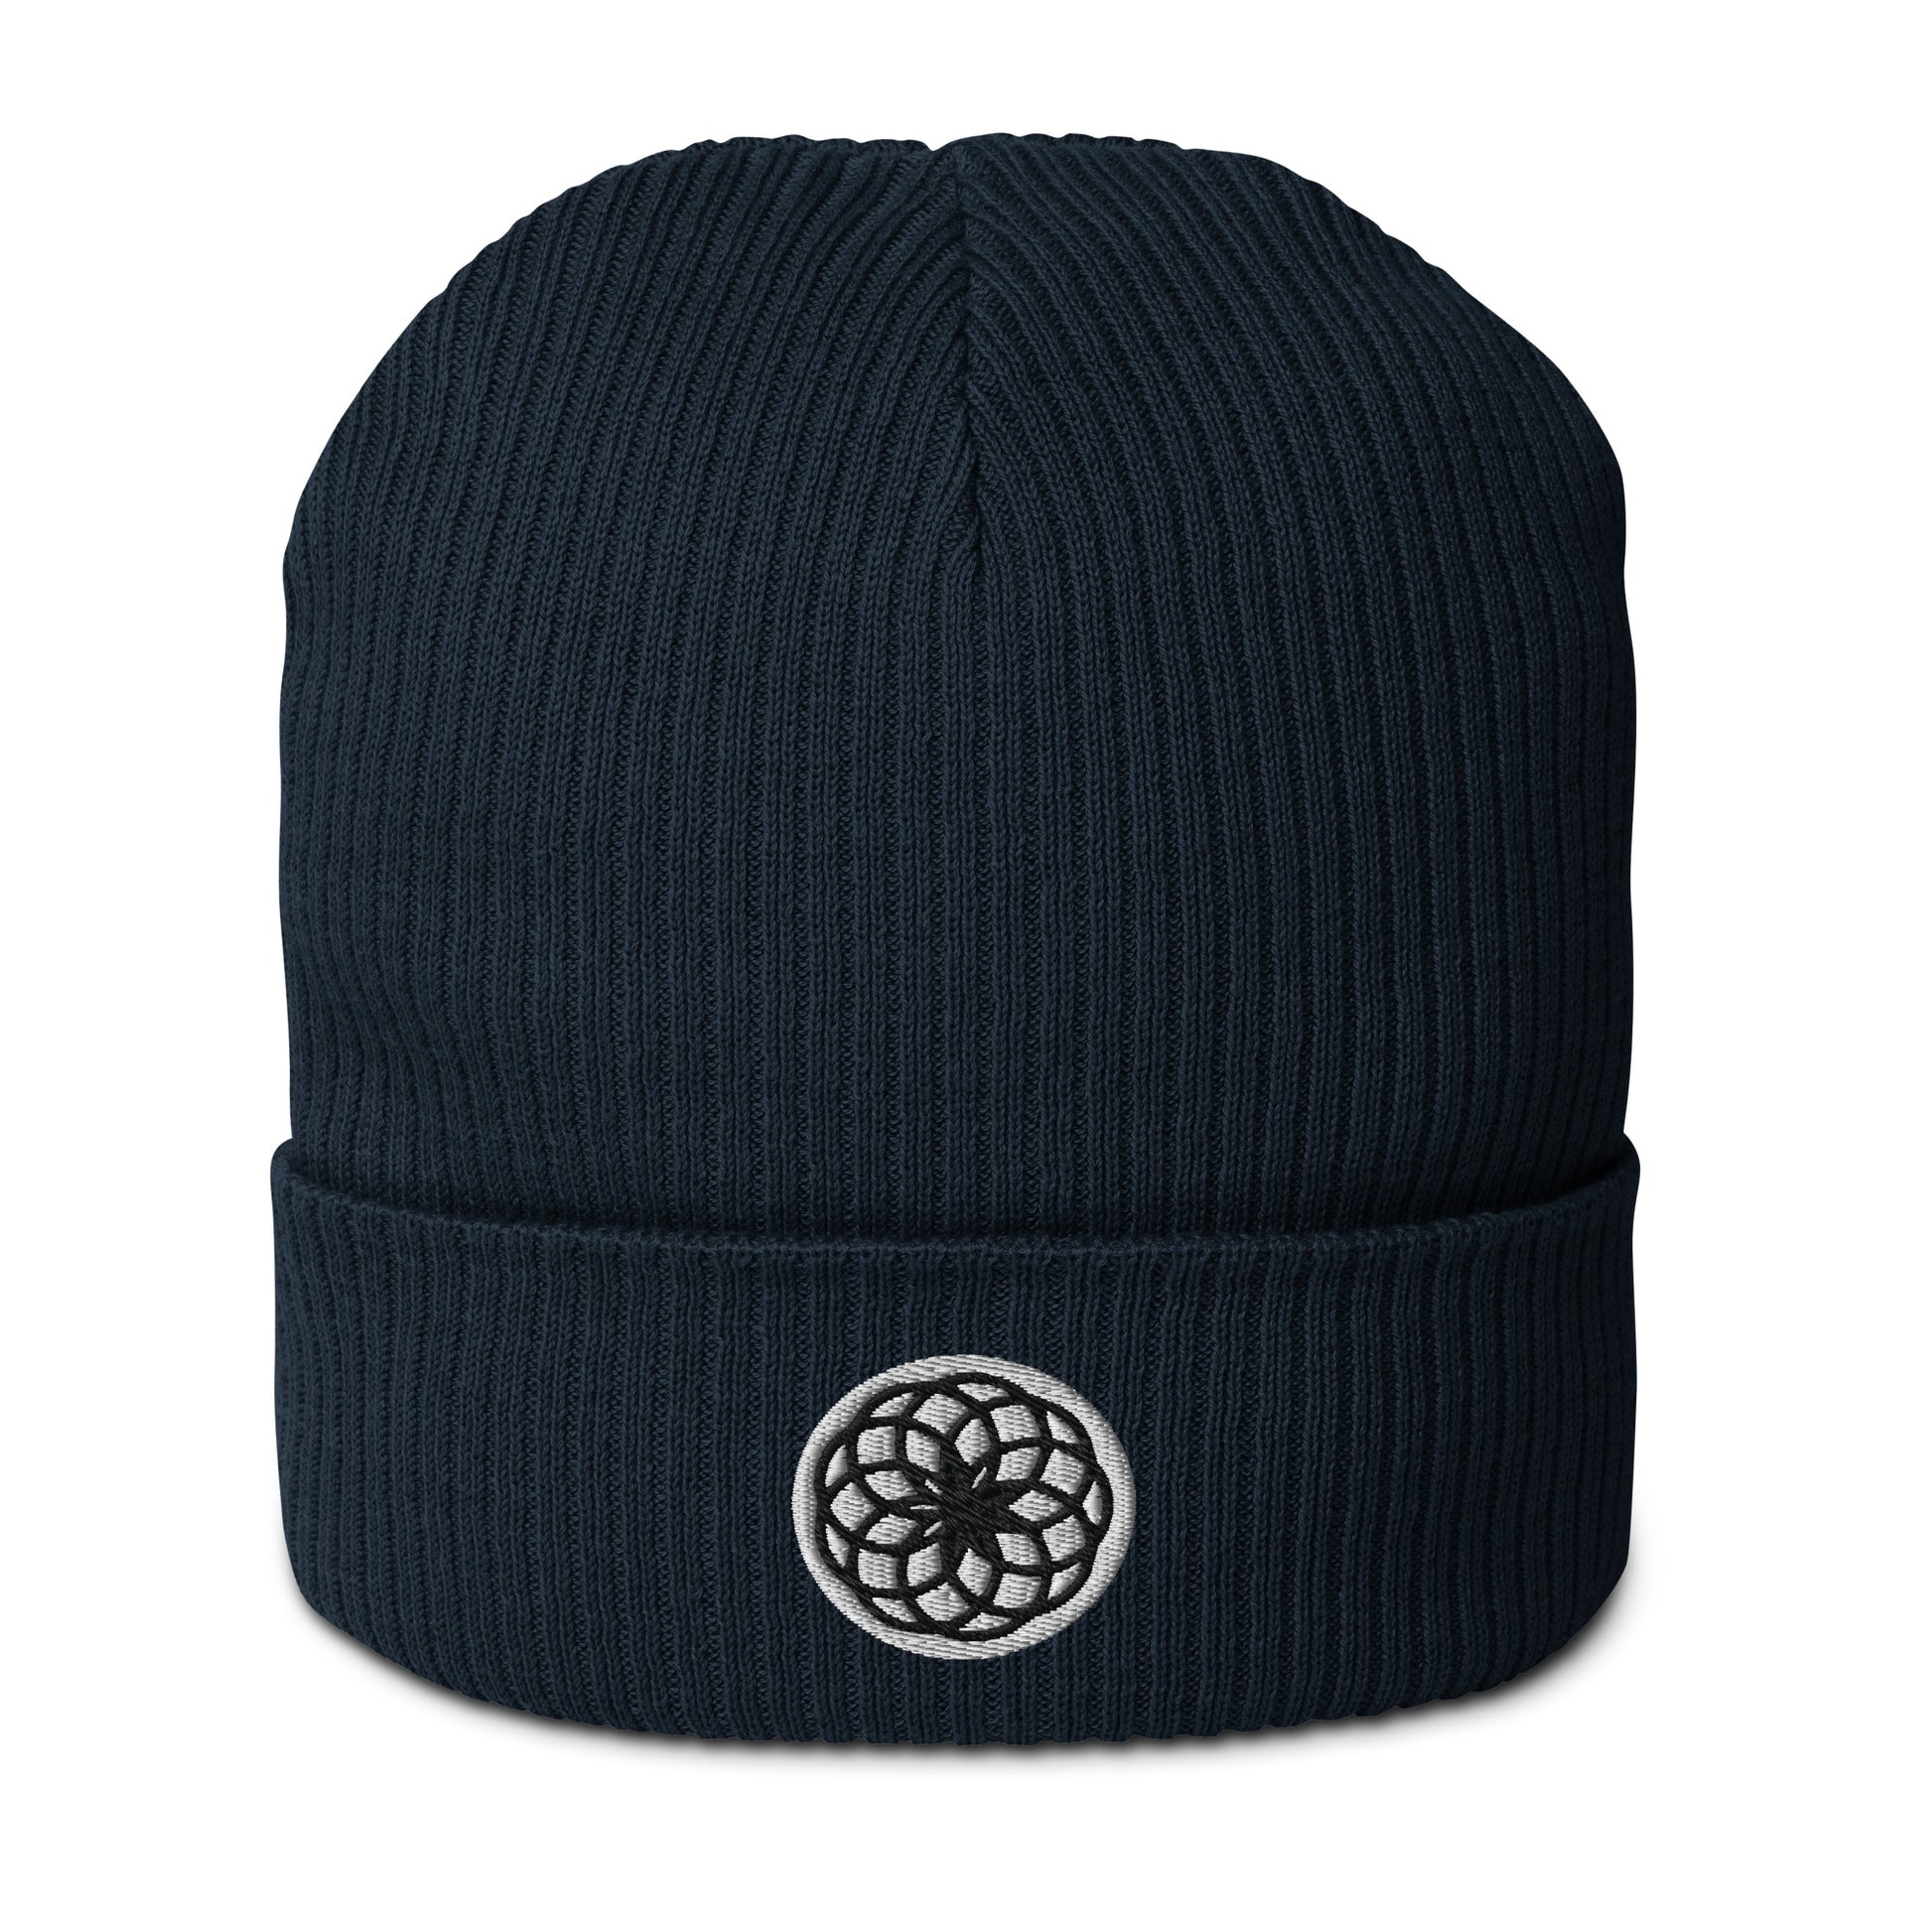 Check out our Organic Cotton Lotus of Life Beanie in Oxford Navy. Made from organic cotton and featuring a Lotus of Life embroidery, it's not your average hat. It's about purity, growth, and embracing life. Plus, it's made of breathable and lightweight natural fabric, so you can stay comfy wherever your journey takes you. Grab one and add a laid-back, high vibe touch to your style.